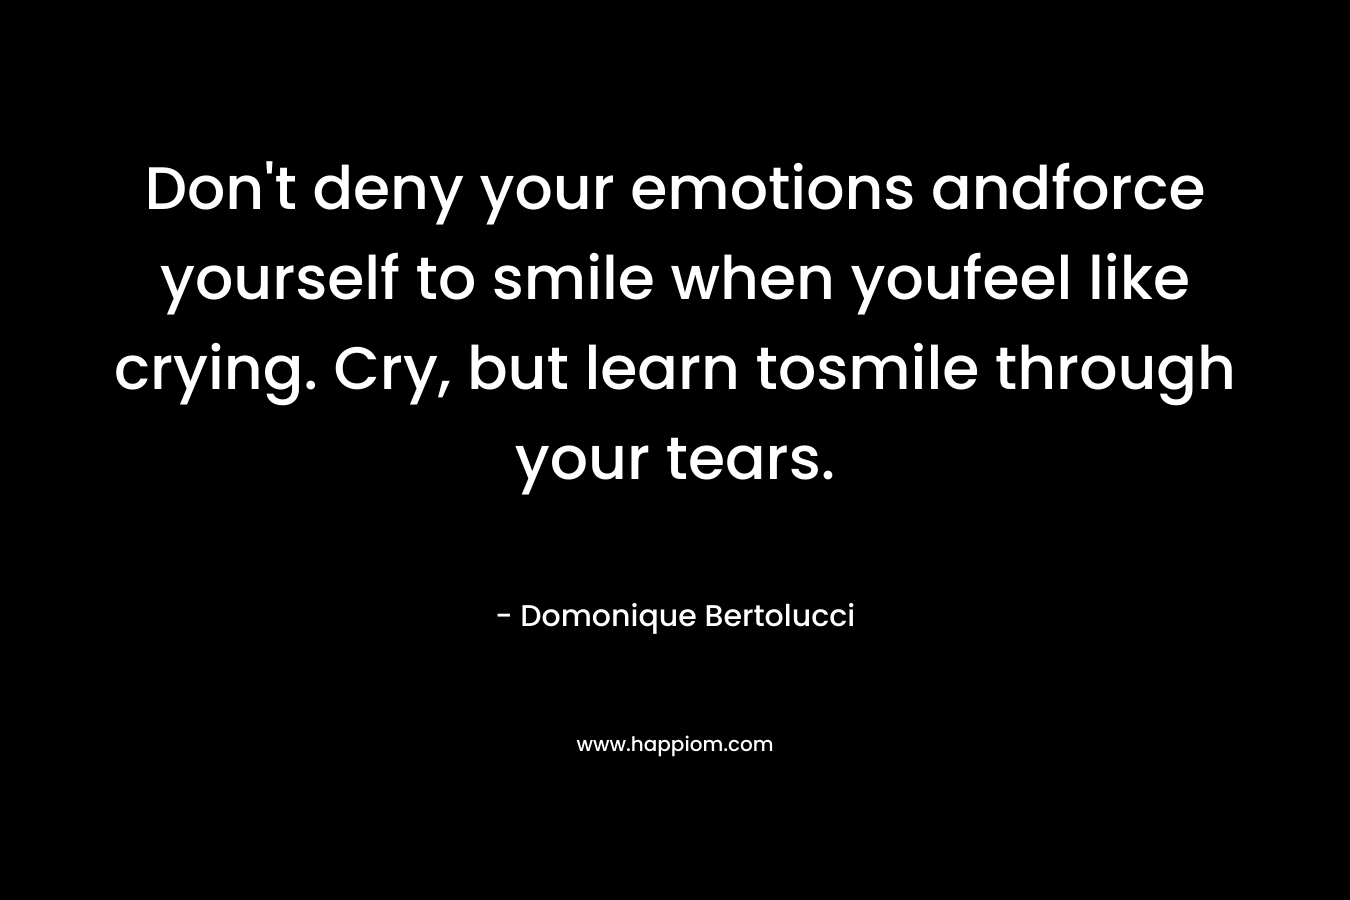 Don’t deny your emotions andforce yourself to smile when youfeel like crying. Cry, but learn tosmile through your tears. – Domonique Bertolucci